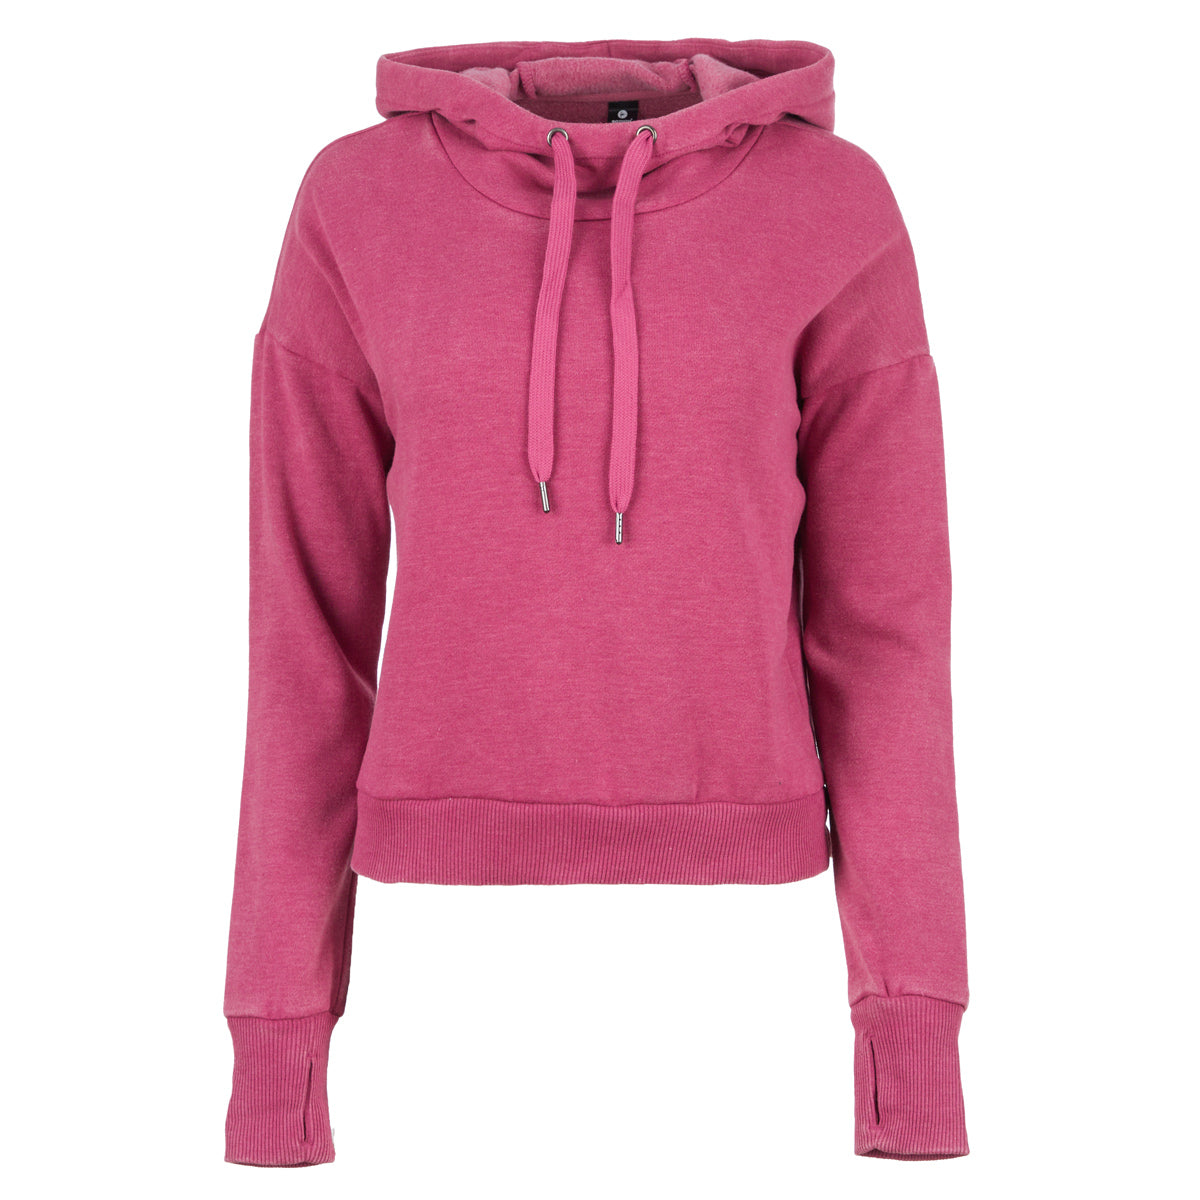 90 Degree By Reflex, Tops, 9 Degree Crop Soft Lined Hoodie